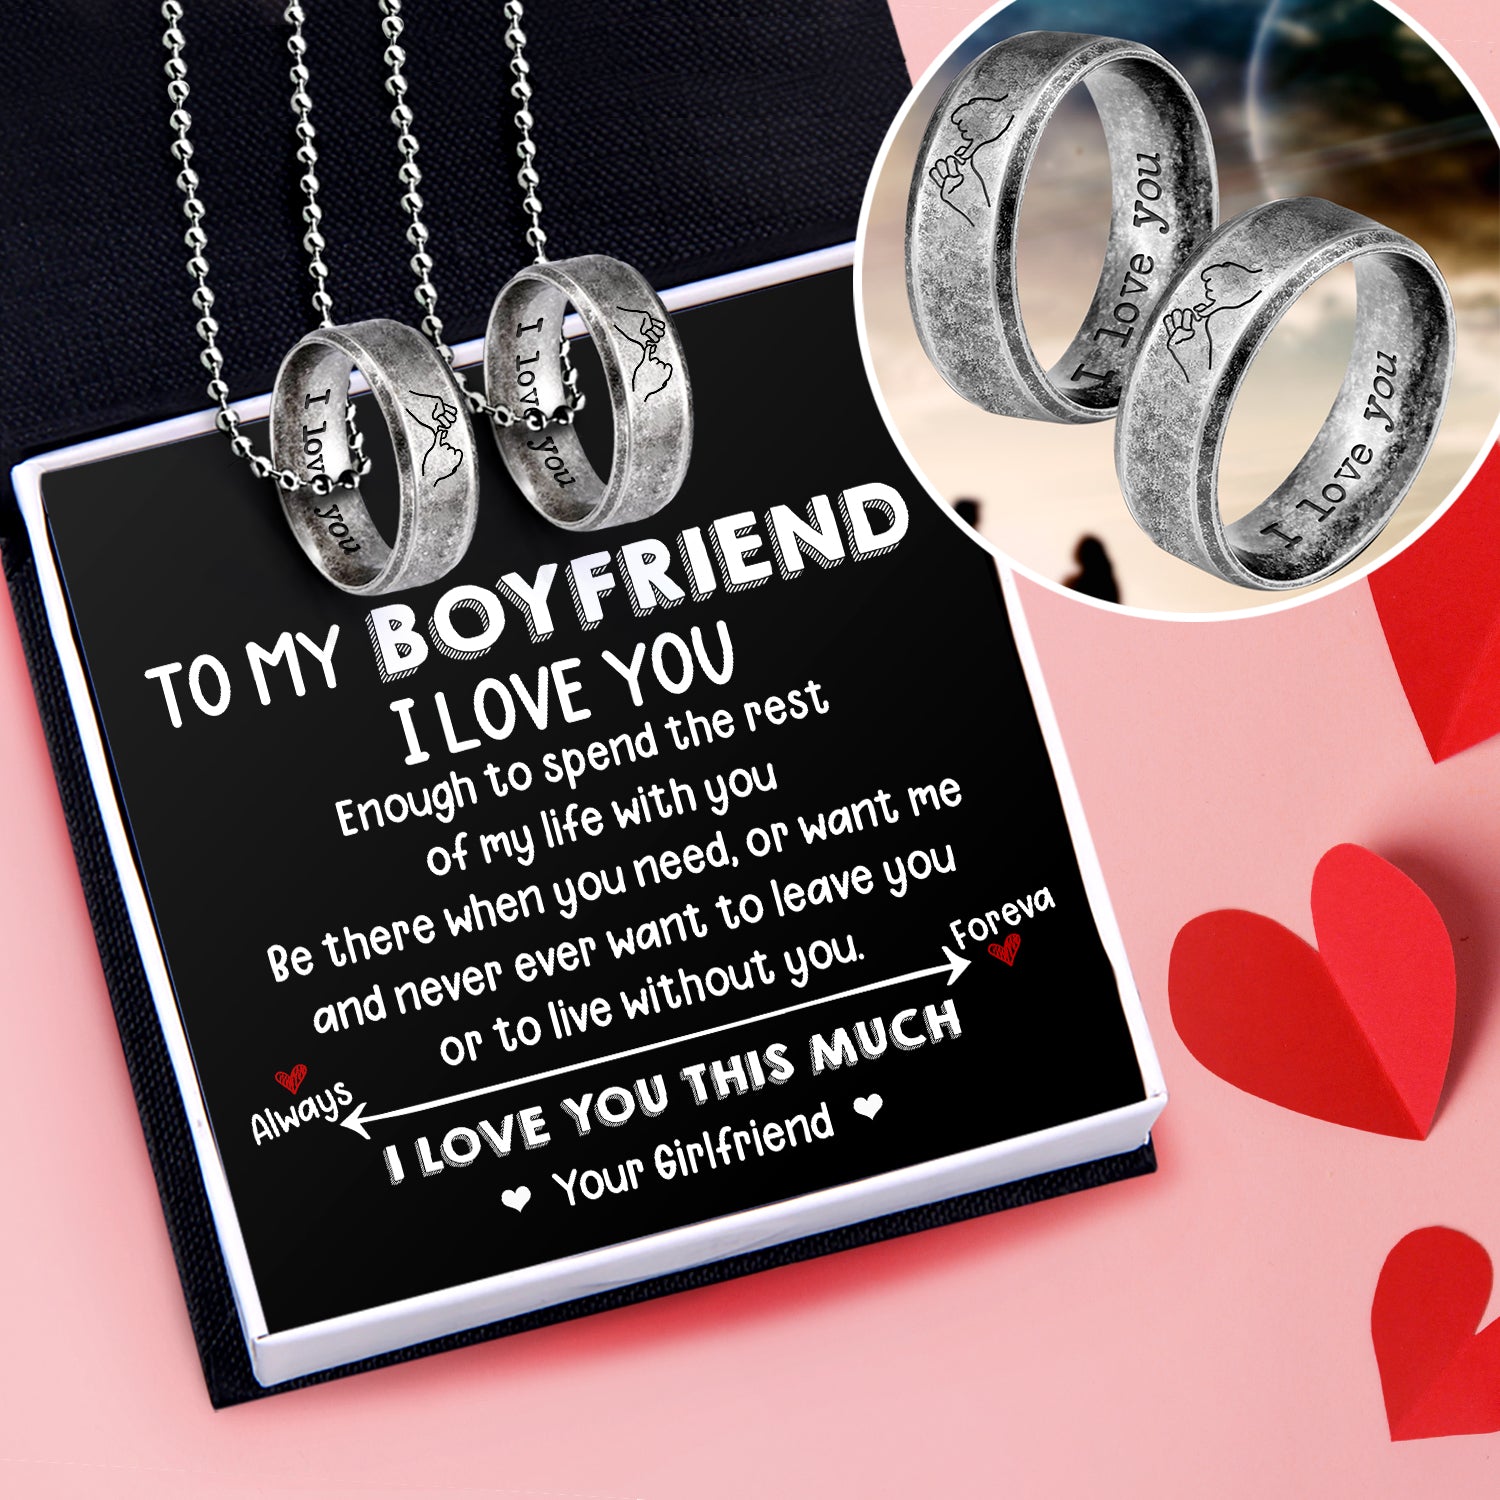 Steel Couple Necklaces - Family - To My Boyfriend - I Love You - Ukgndx12004